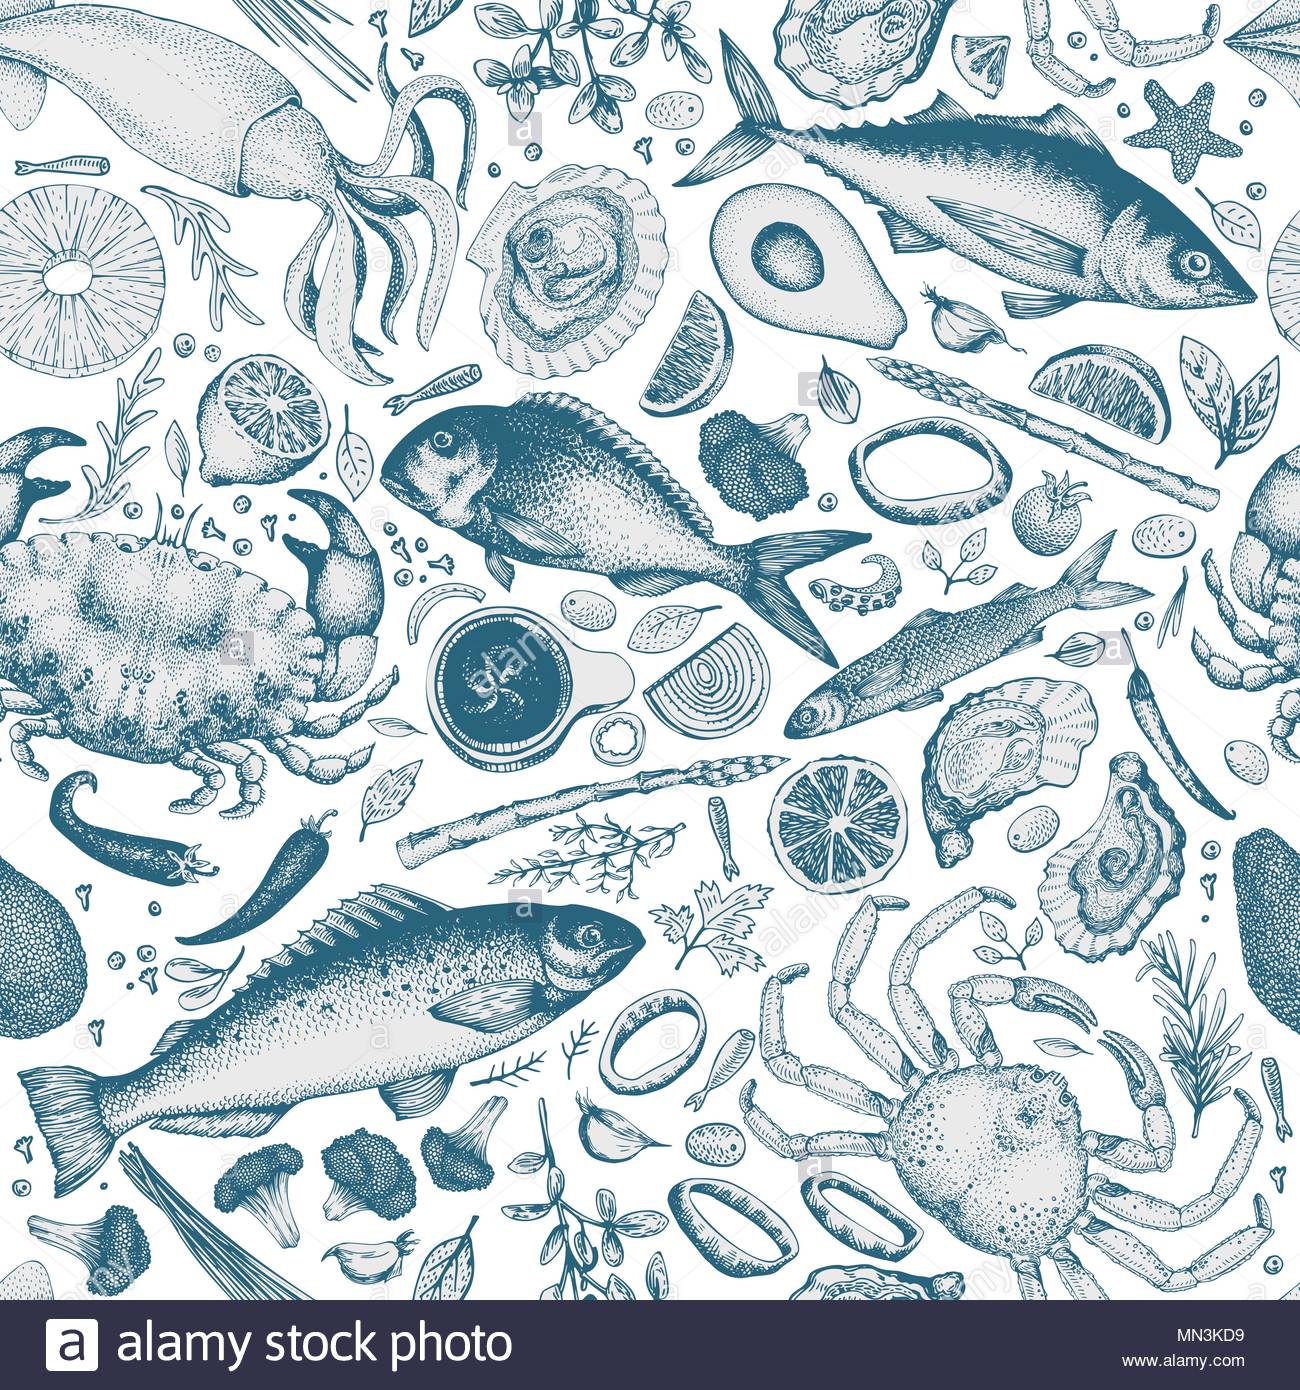 Seafood Seamless Vector Pattern Can Be Use For Restaurants Menu